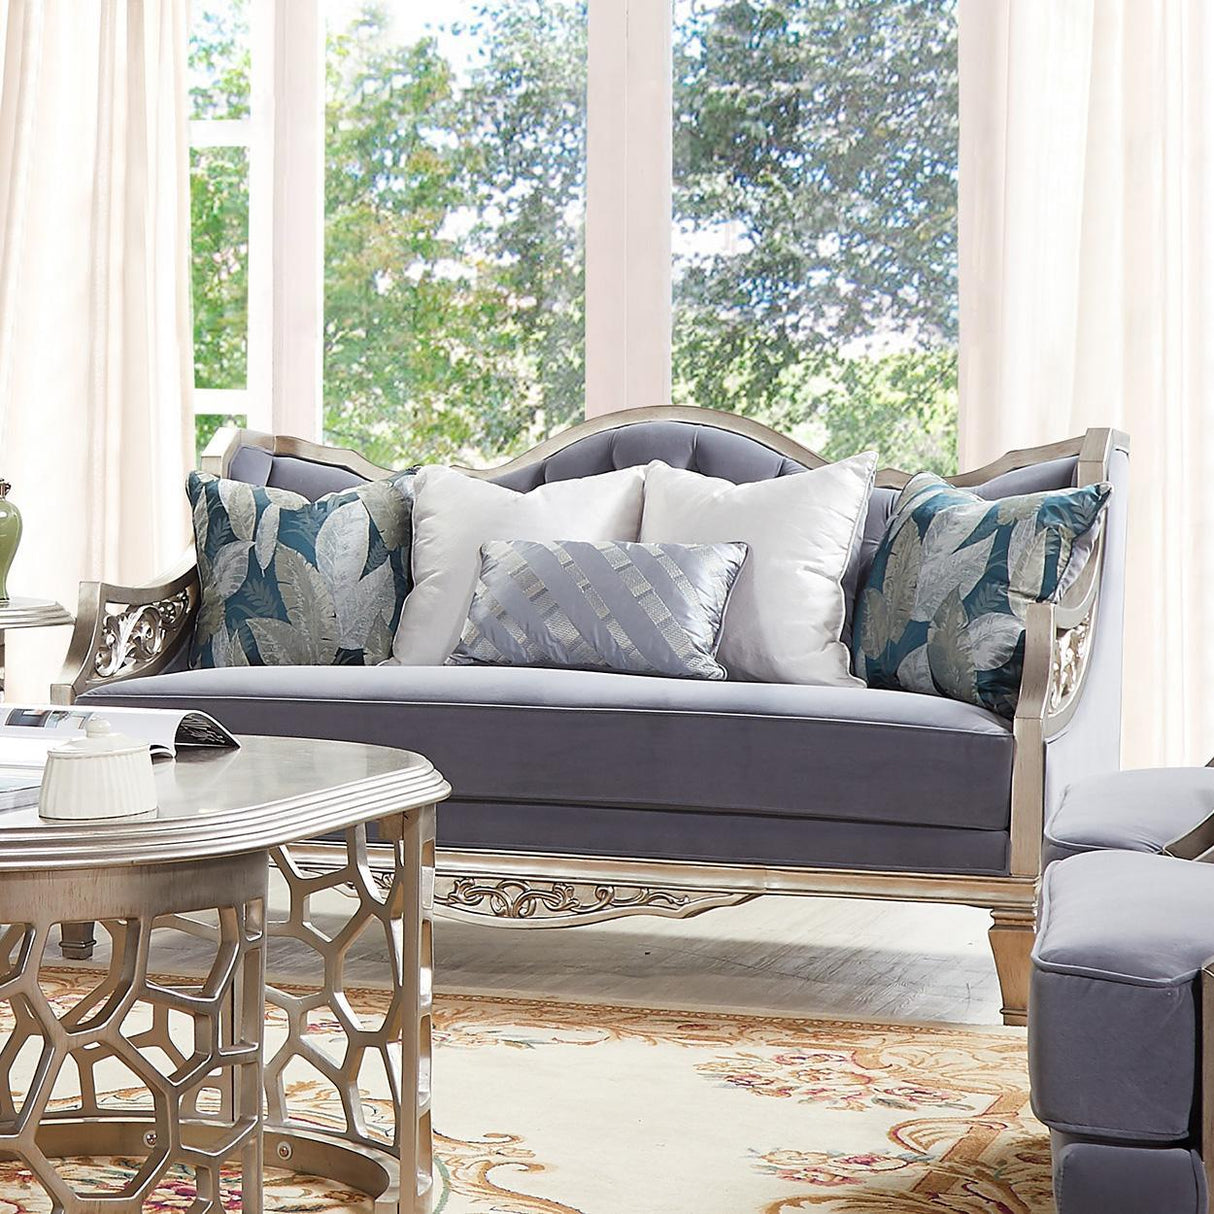 HD-701 Traditional Sofa and Loveseat in Cobalt Fabric & Silver Finish by Homey Design Homey Design Furniture